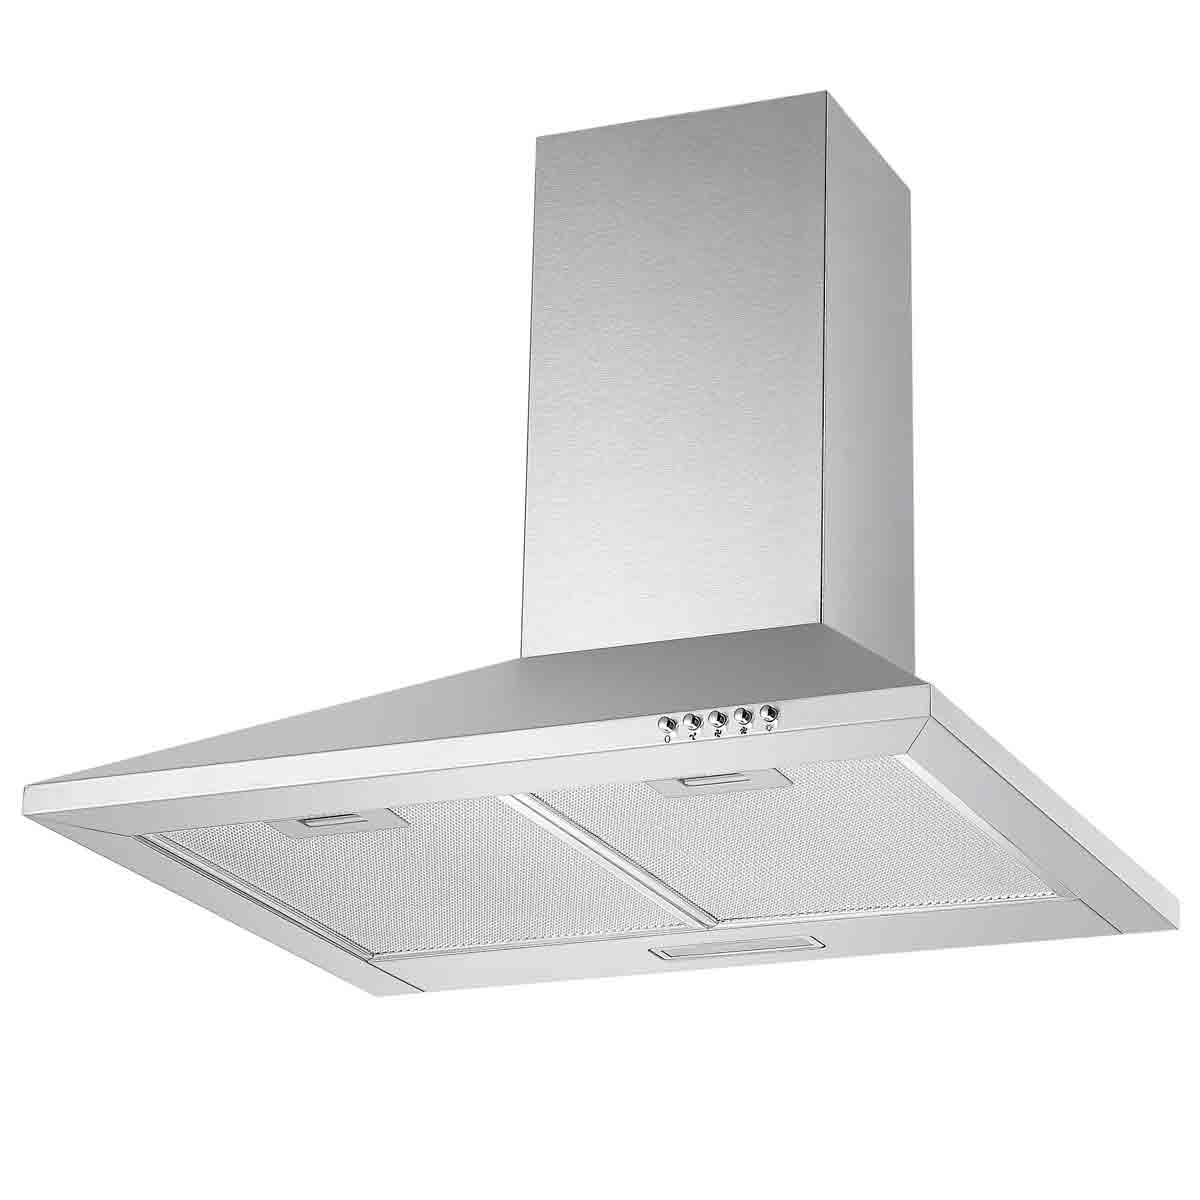 Cookology CH600SS 60cm Chimney Cooker Hood - Stainless Steel